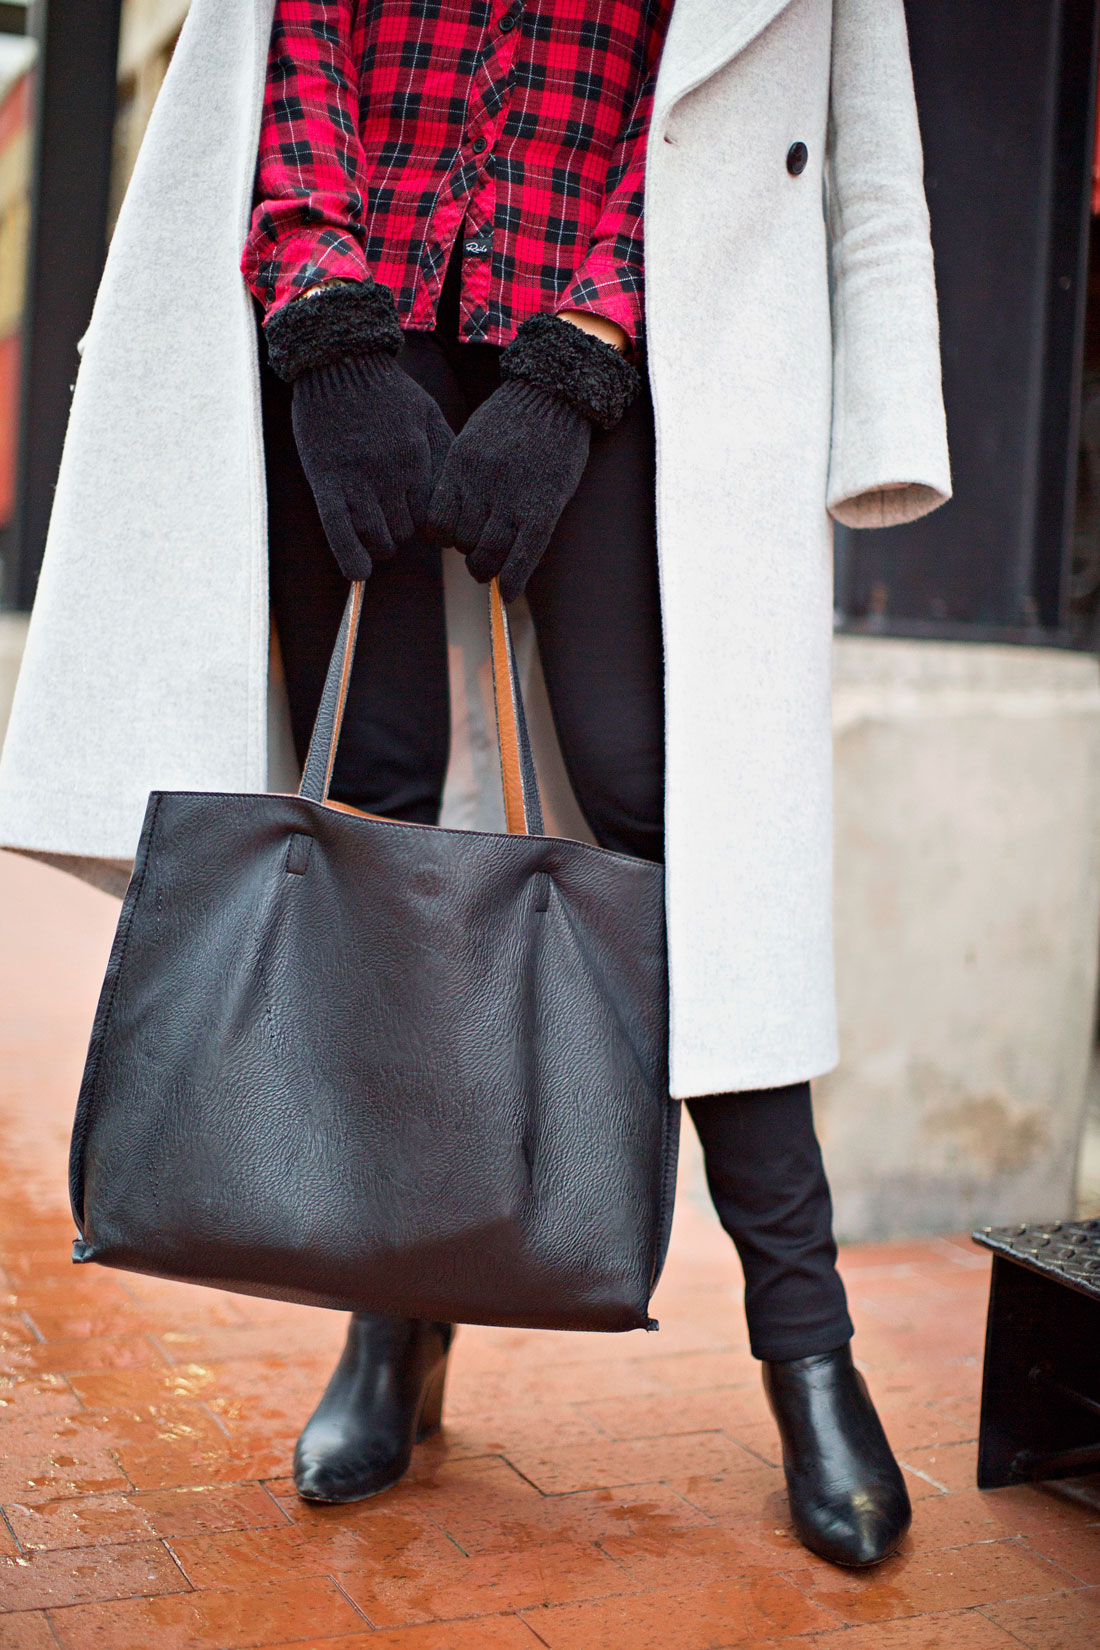 Nordstrom reversible tote is a casual winter fashion accessory for Amanda from A Glam Lifestyle blog